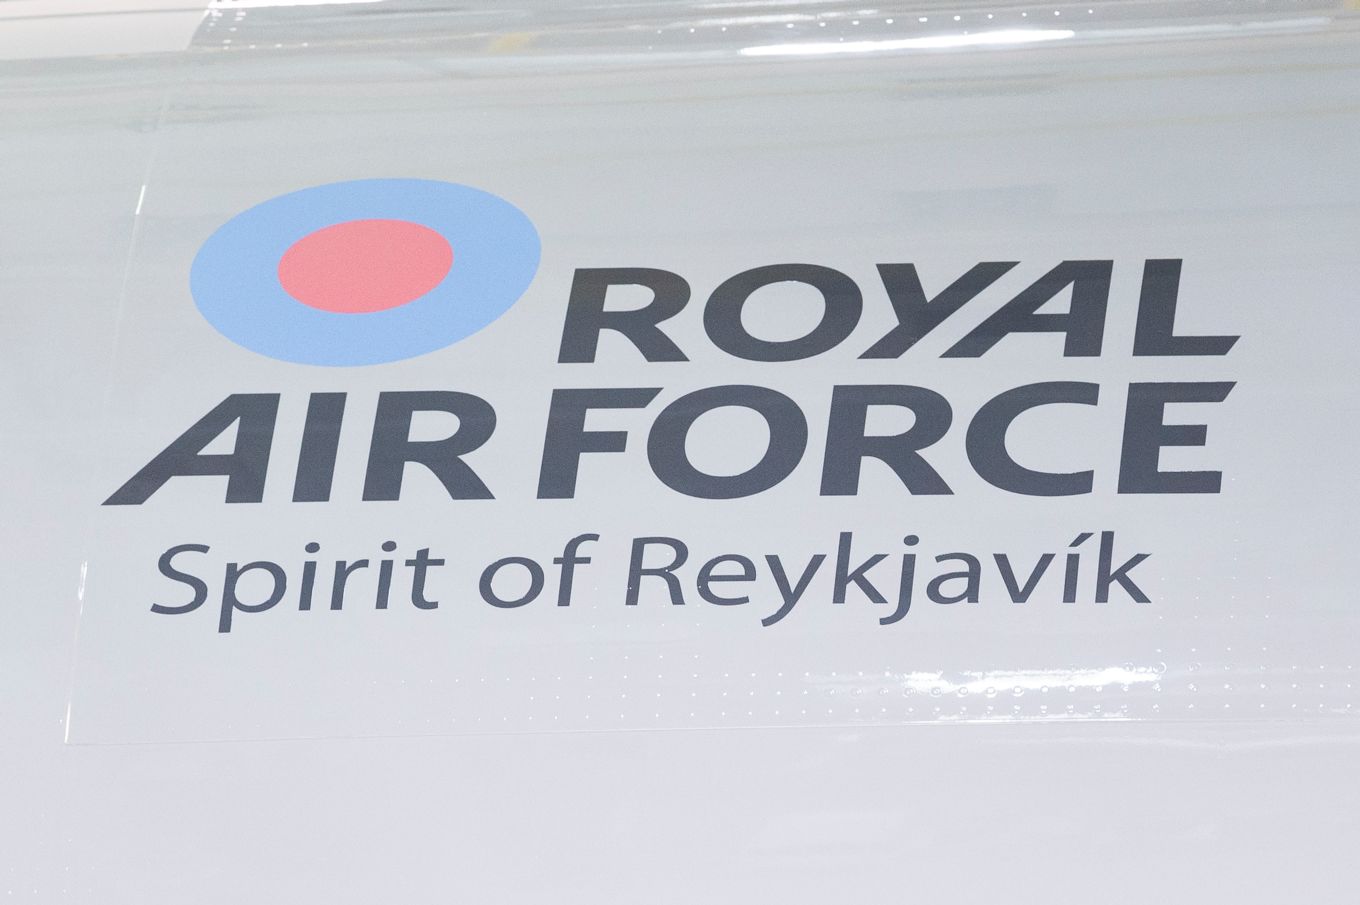 Image shows the name on the side of the aircraft - Spirit of Reykjavik.